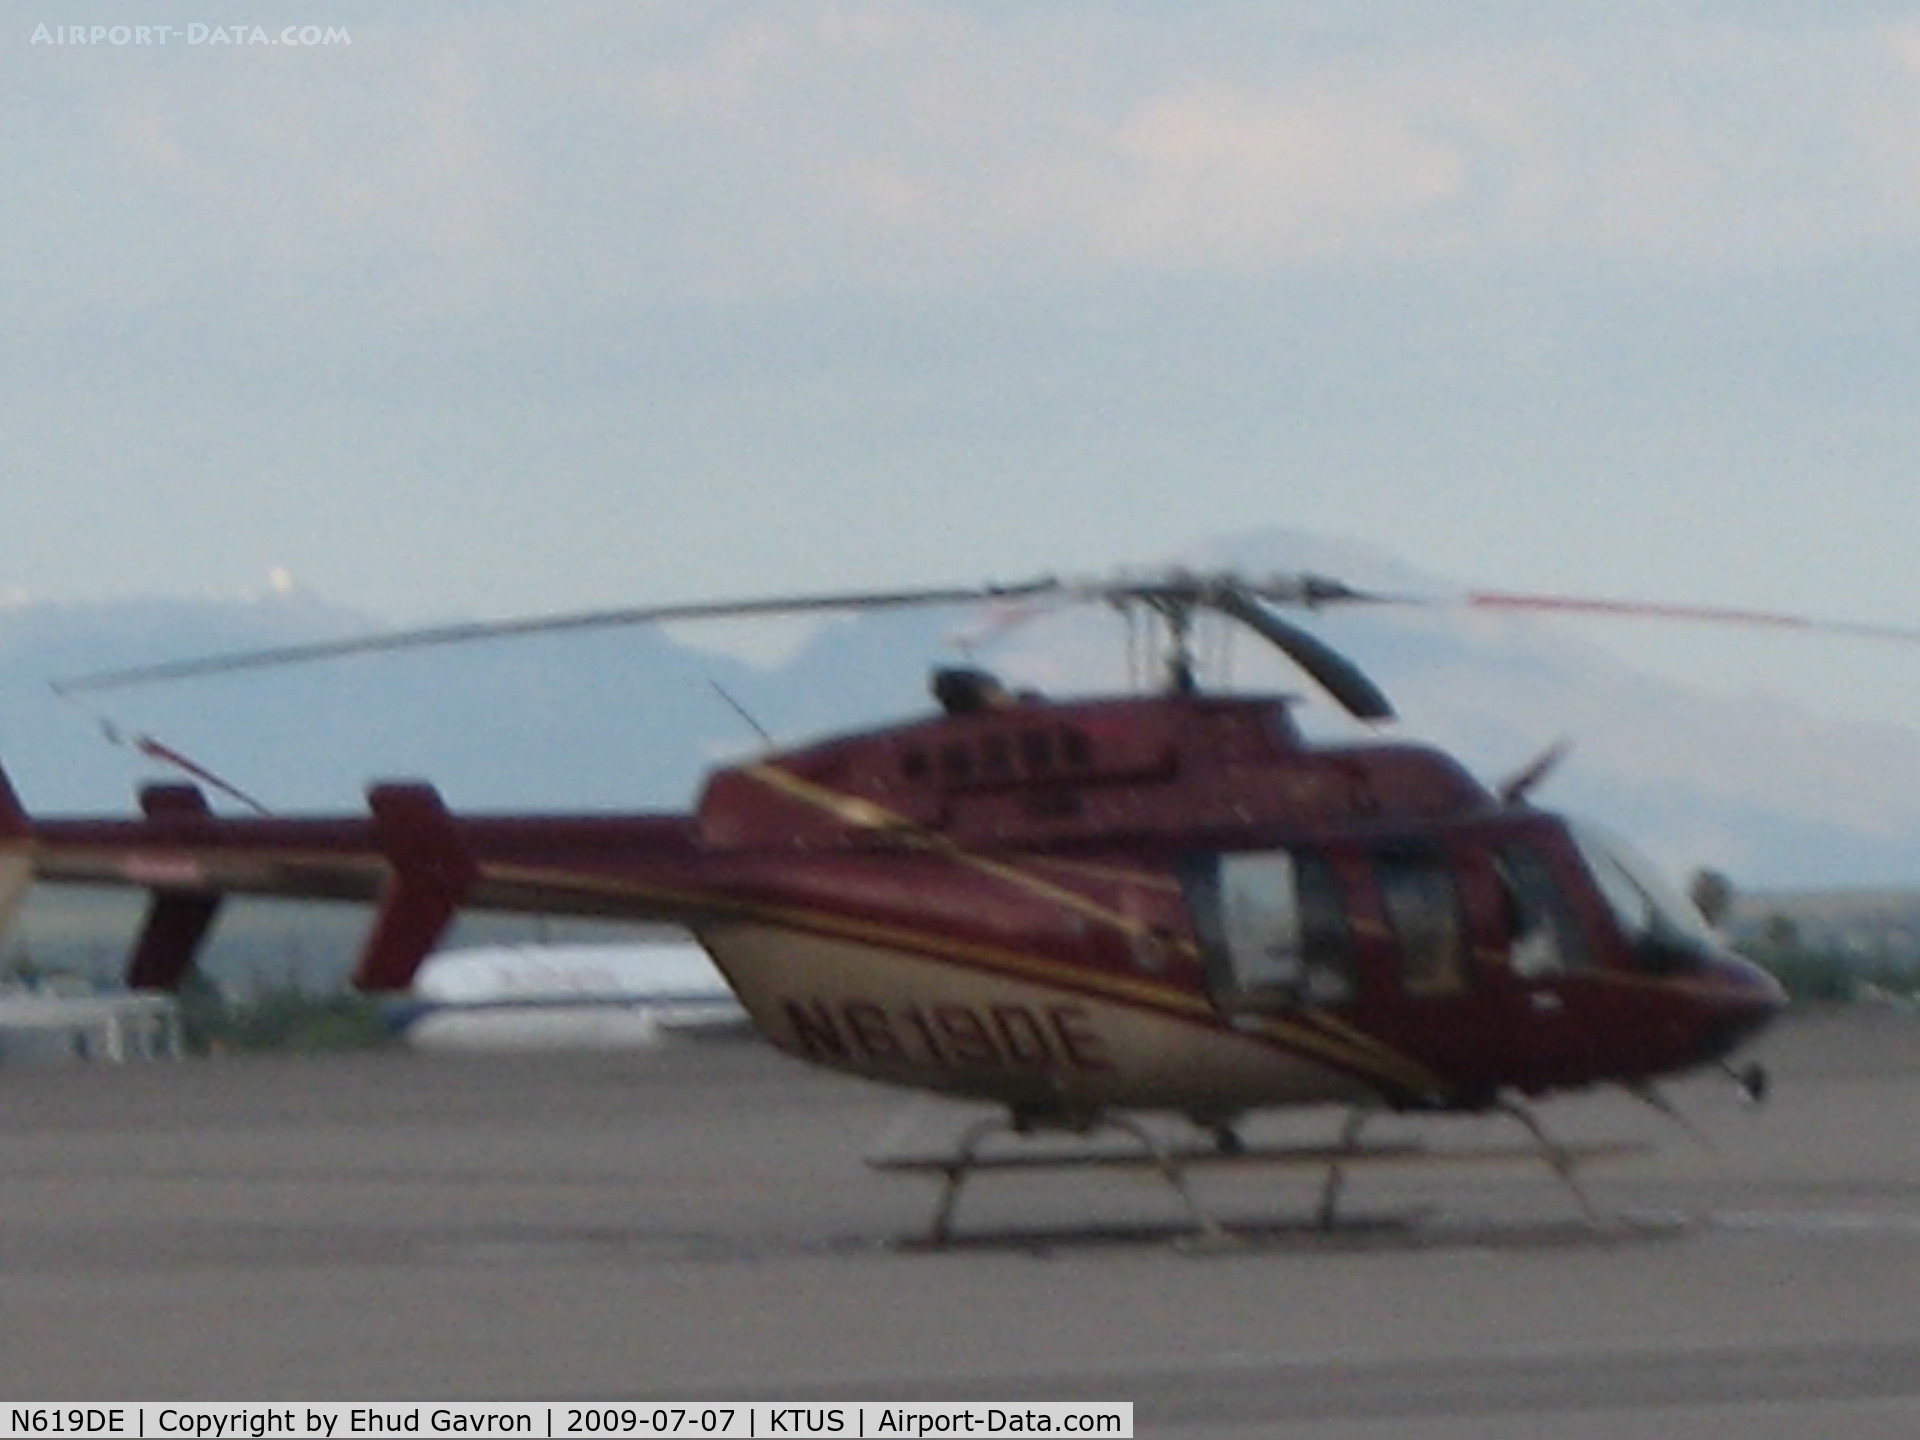 N619DE, 2000 Bell 407 C/N 53410, Helicopter hovering over the helipad at base of the tower, KTUS